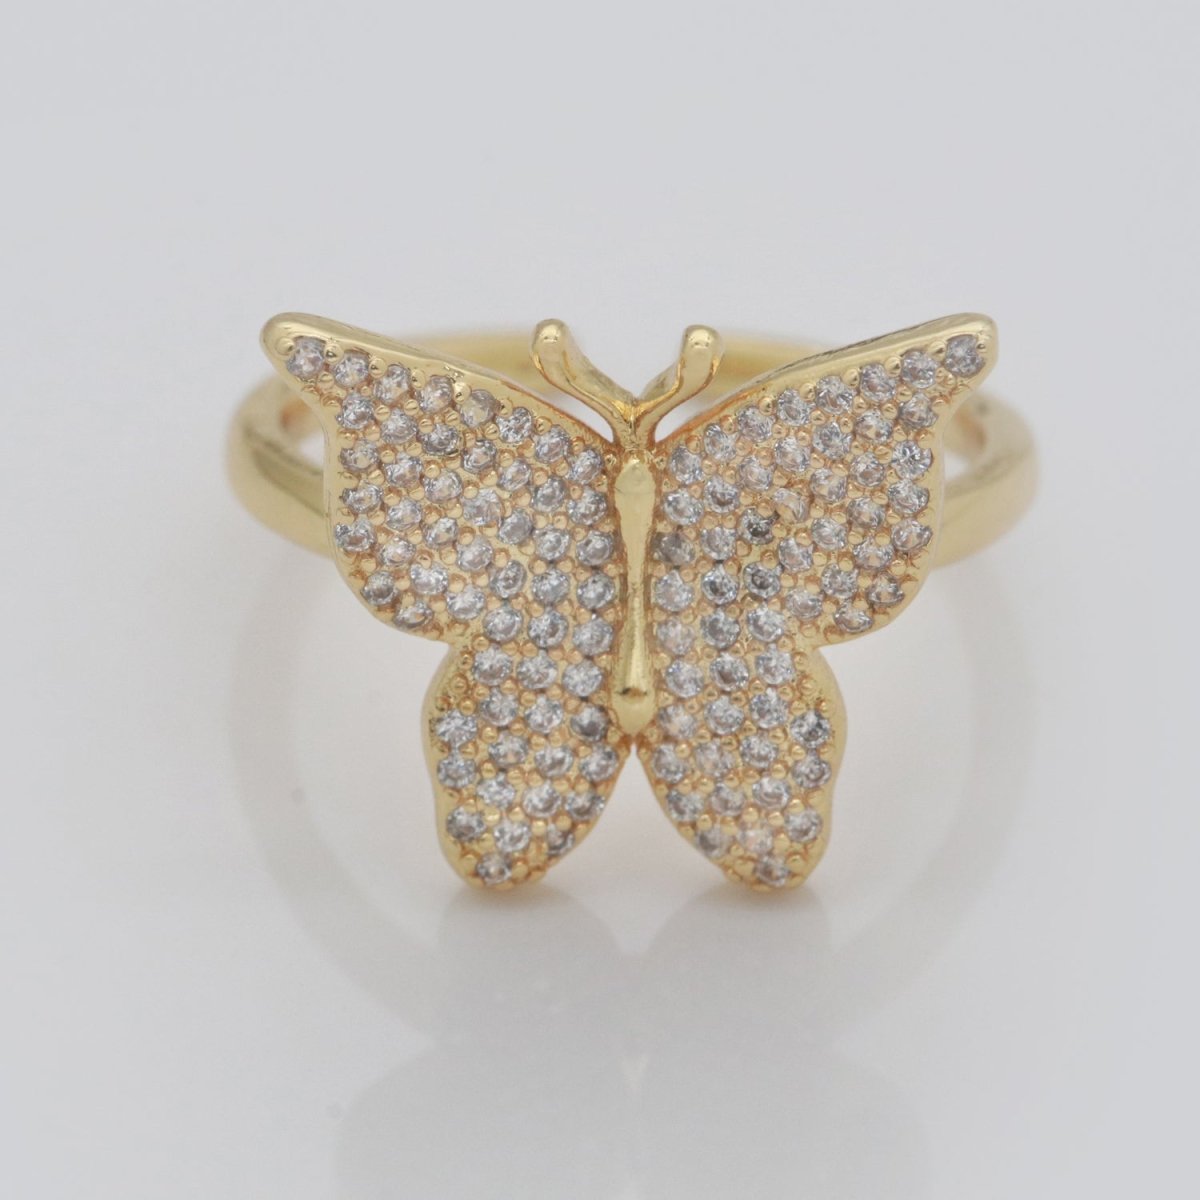 CZ Micro pave Colorful Enamel Butterfly Shape Adjustable Ring,14K Gold Filled CZ Open Ring Adjustable Statement Ring - DLUXCA